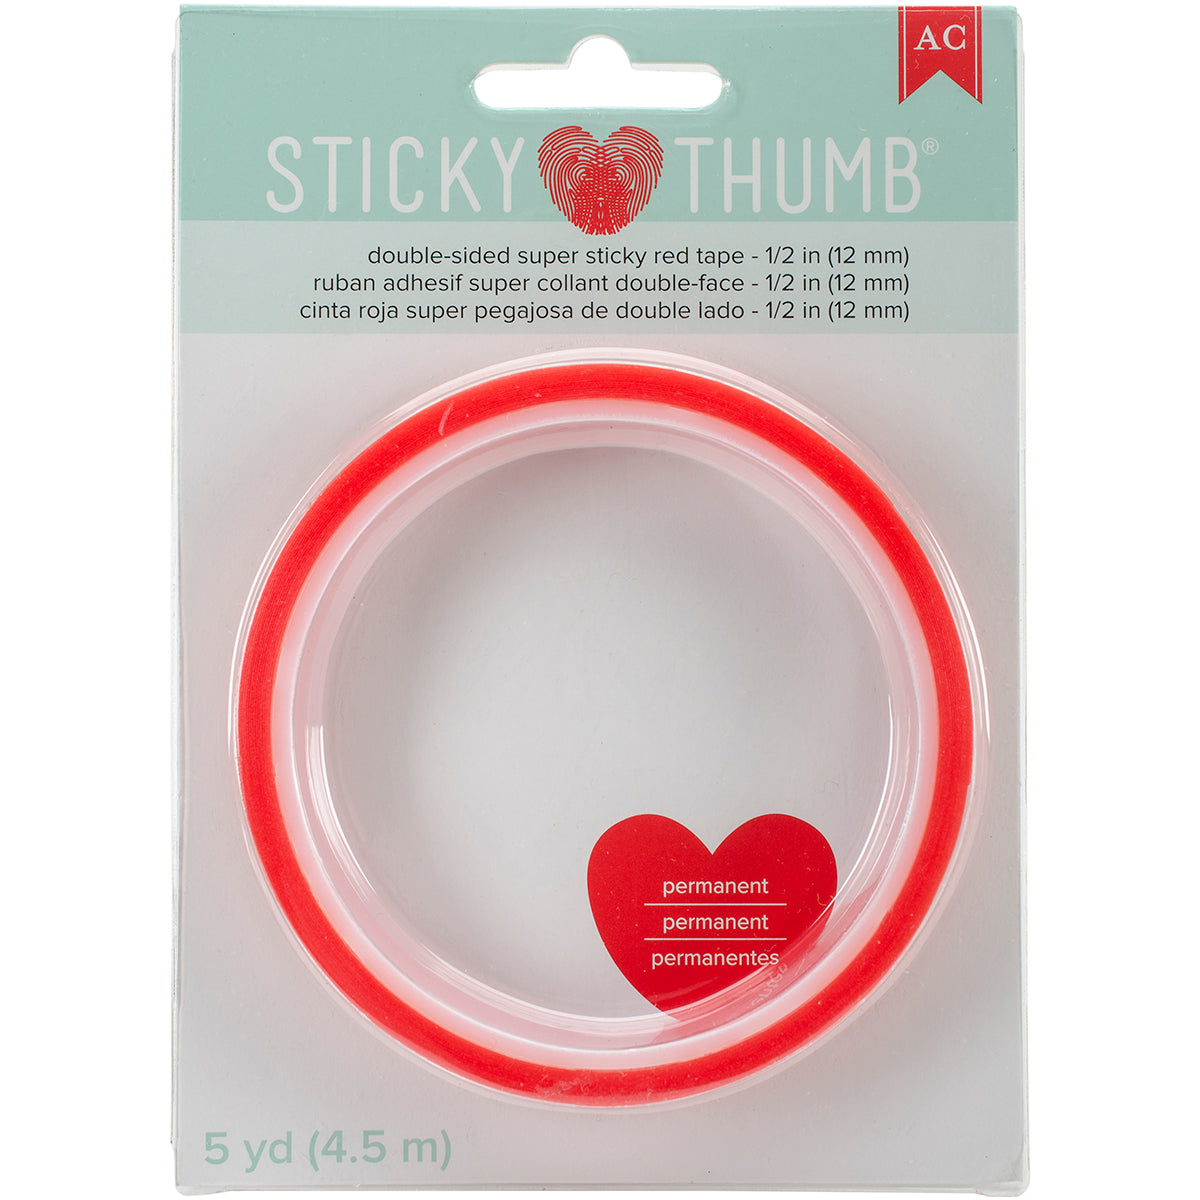 Sticky Thumb Double-Sided Super Sticky Red Tape-.5"X5yd